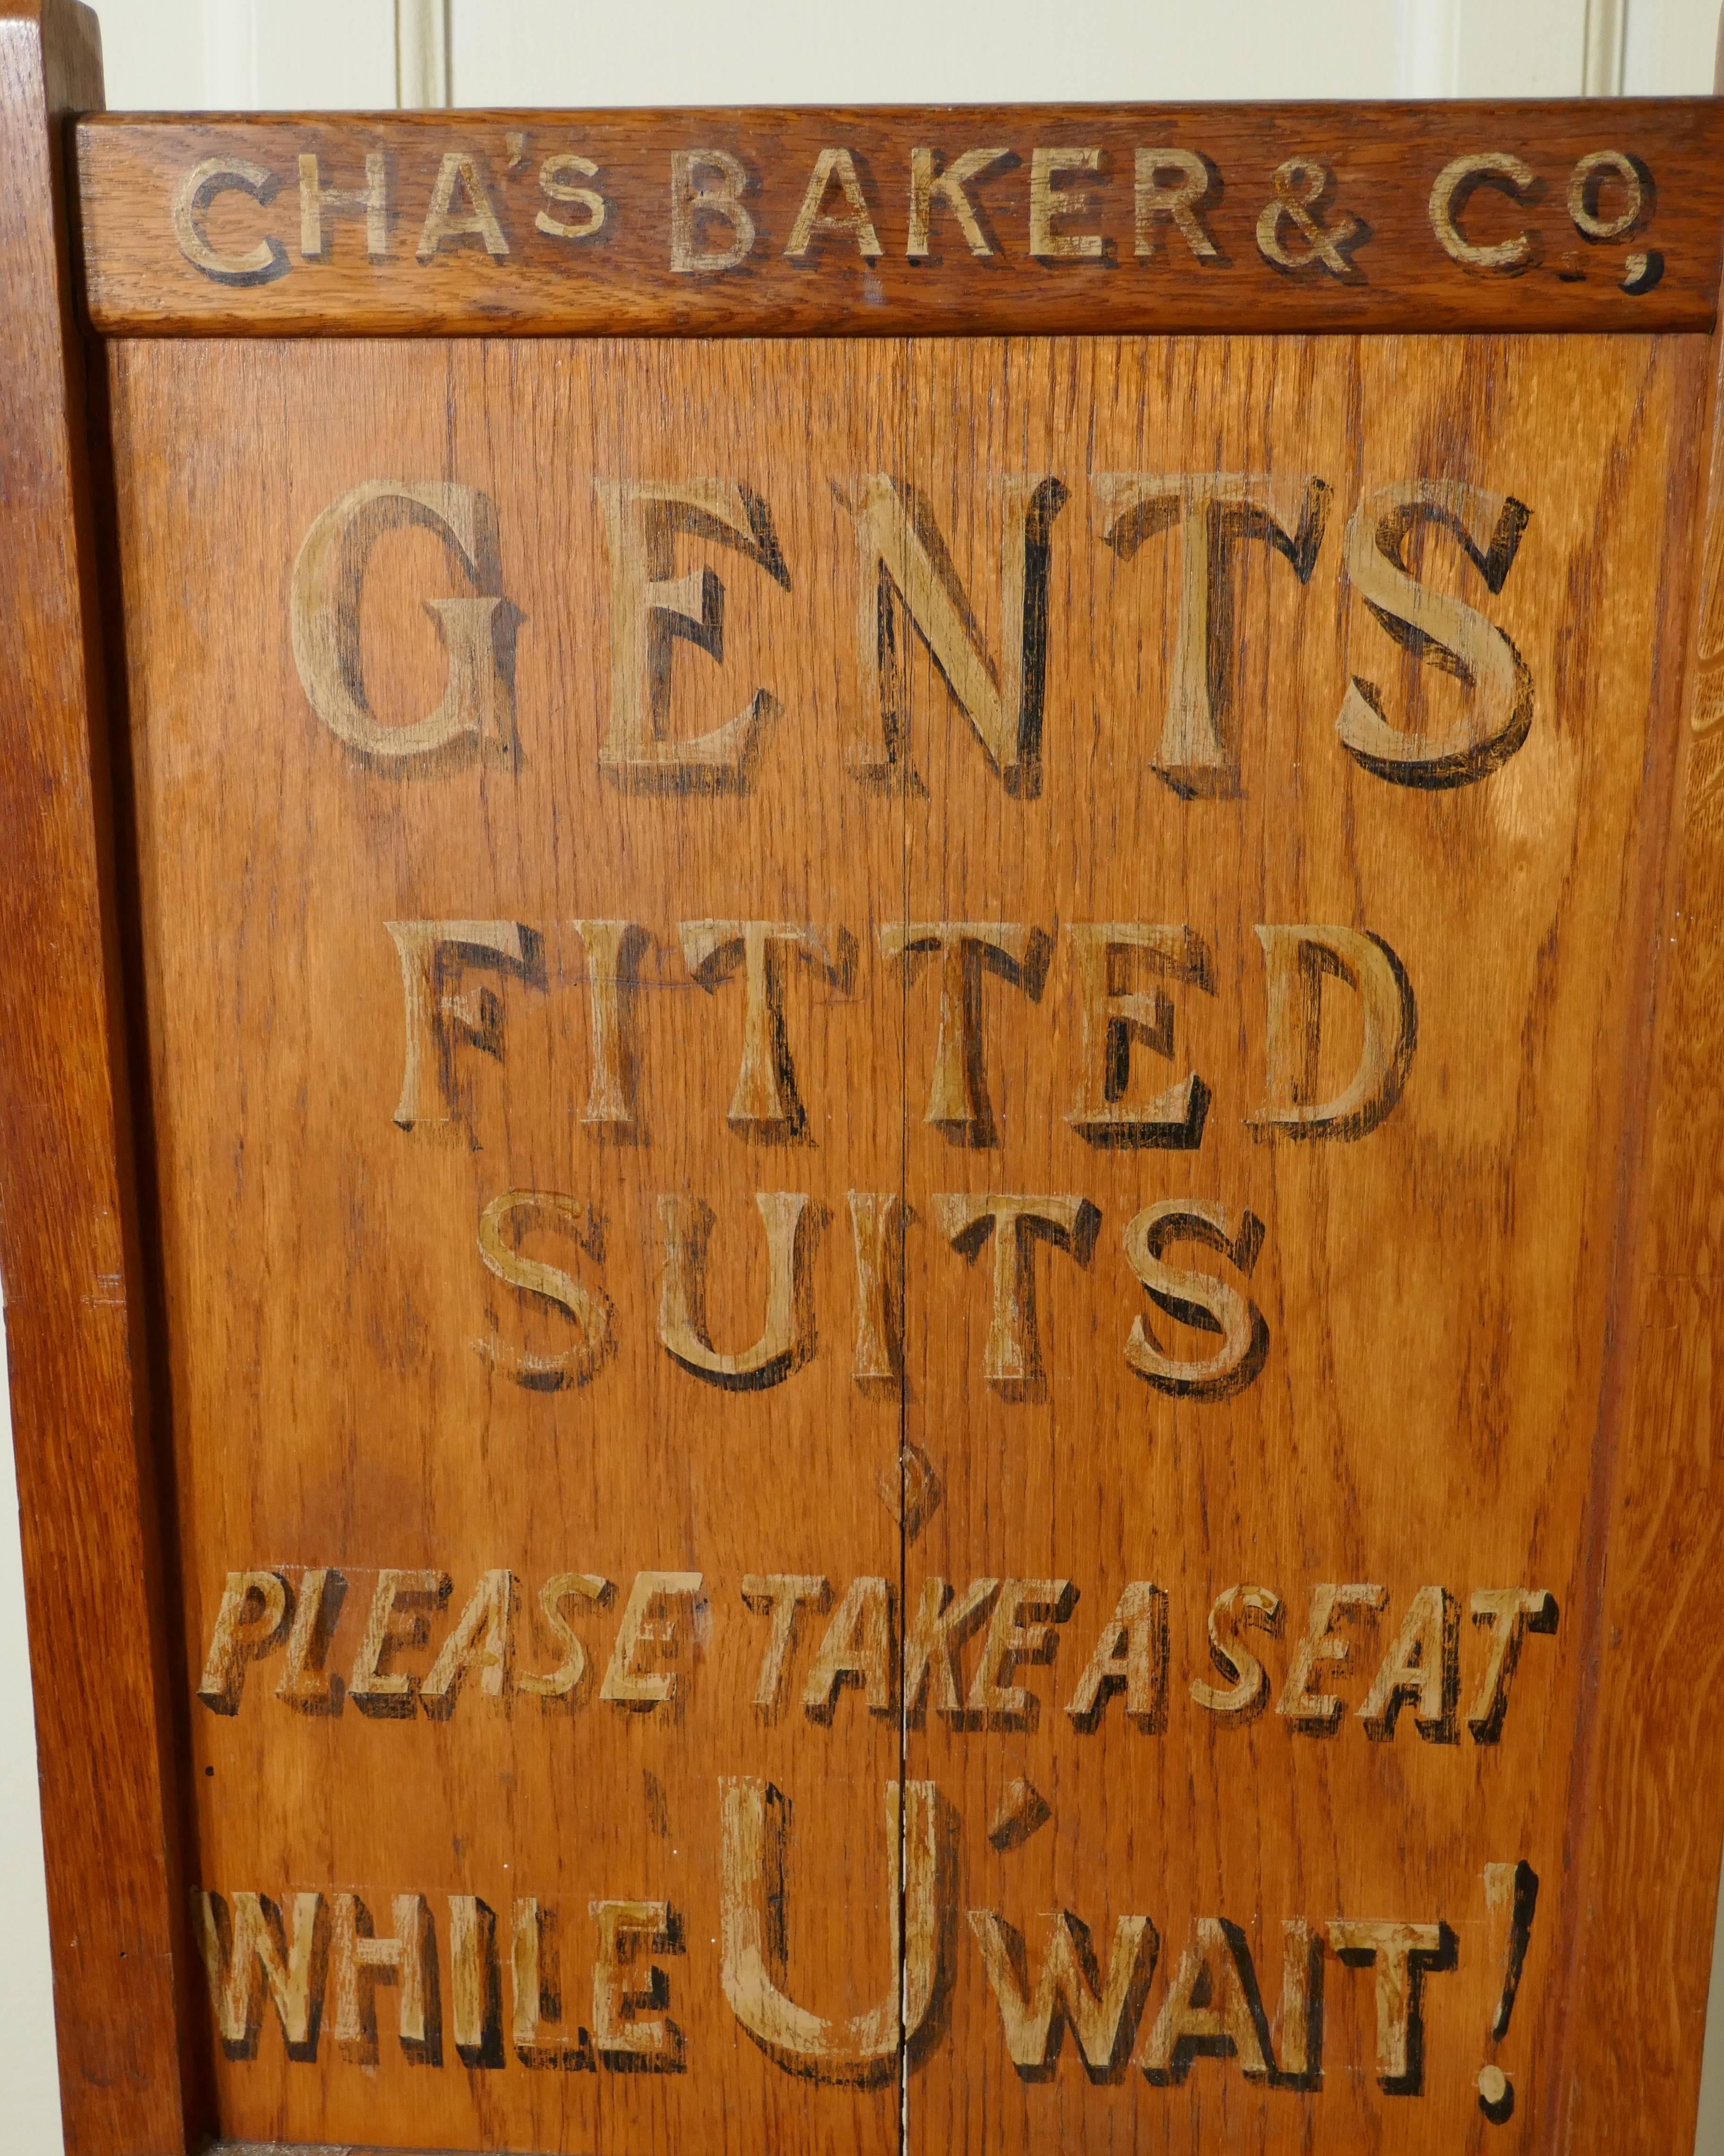 Victorian oak trouser press chair gentleman’s outfitter shop display

This is a very attractive piece, the chair is made in oak and has gold and shadowed lettering painted on the chair back, the chair was made by V.C.Bond of Hackney
This chair is